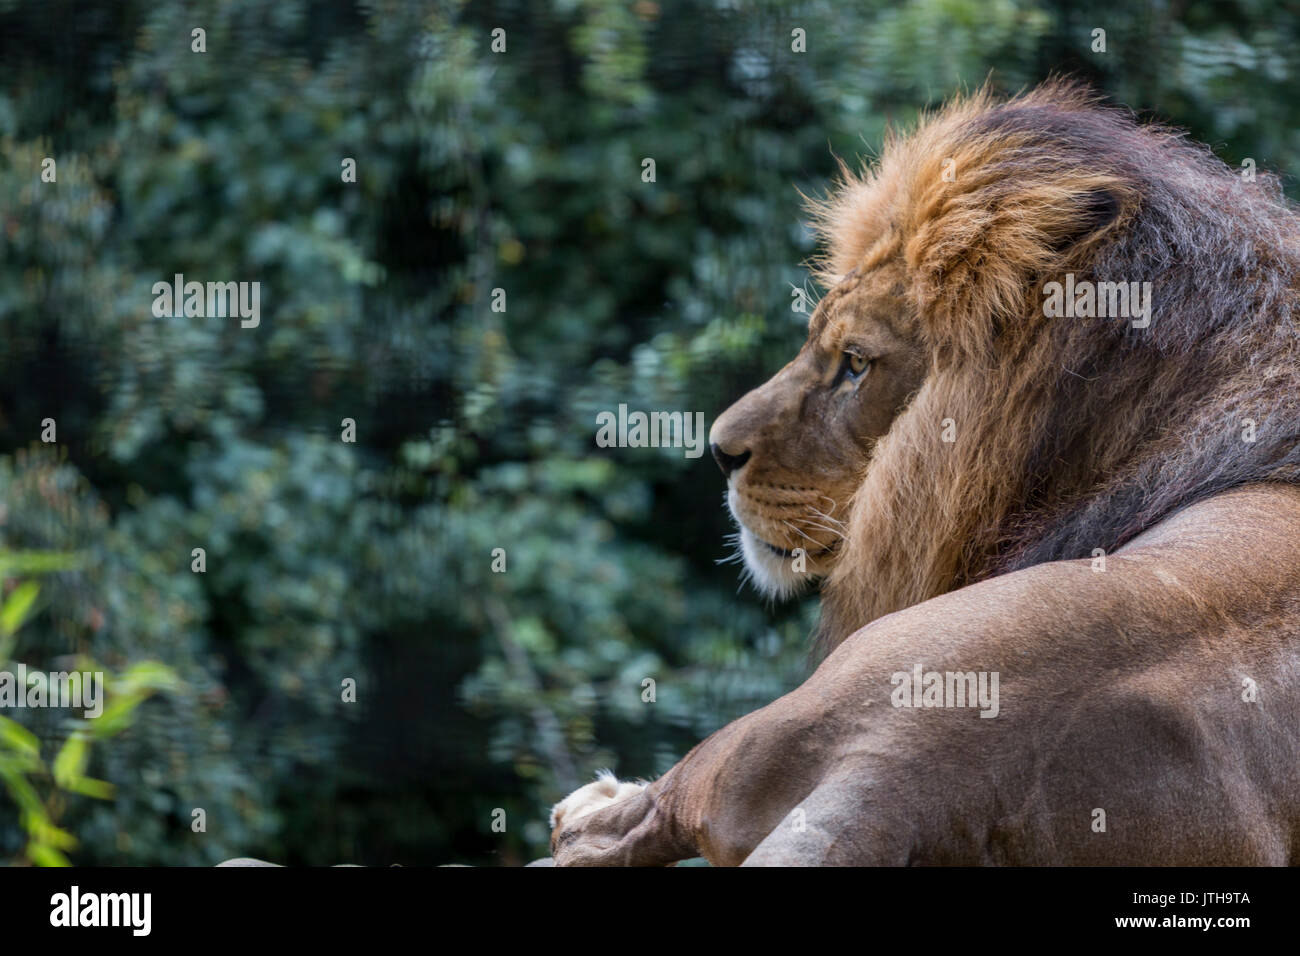 Port Lympne wildlife reserve Kent, UK. 9th August 2017. The 10th August marks World Lion Day. Lion population has dropped by 43% over the last 20yrs, it is thought there are around 20,000 left Credit: Darren Attersley/Alamy Live News Stock Photo